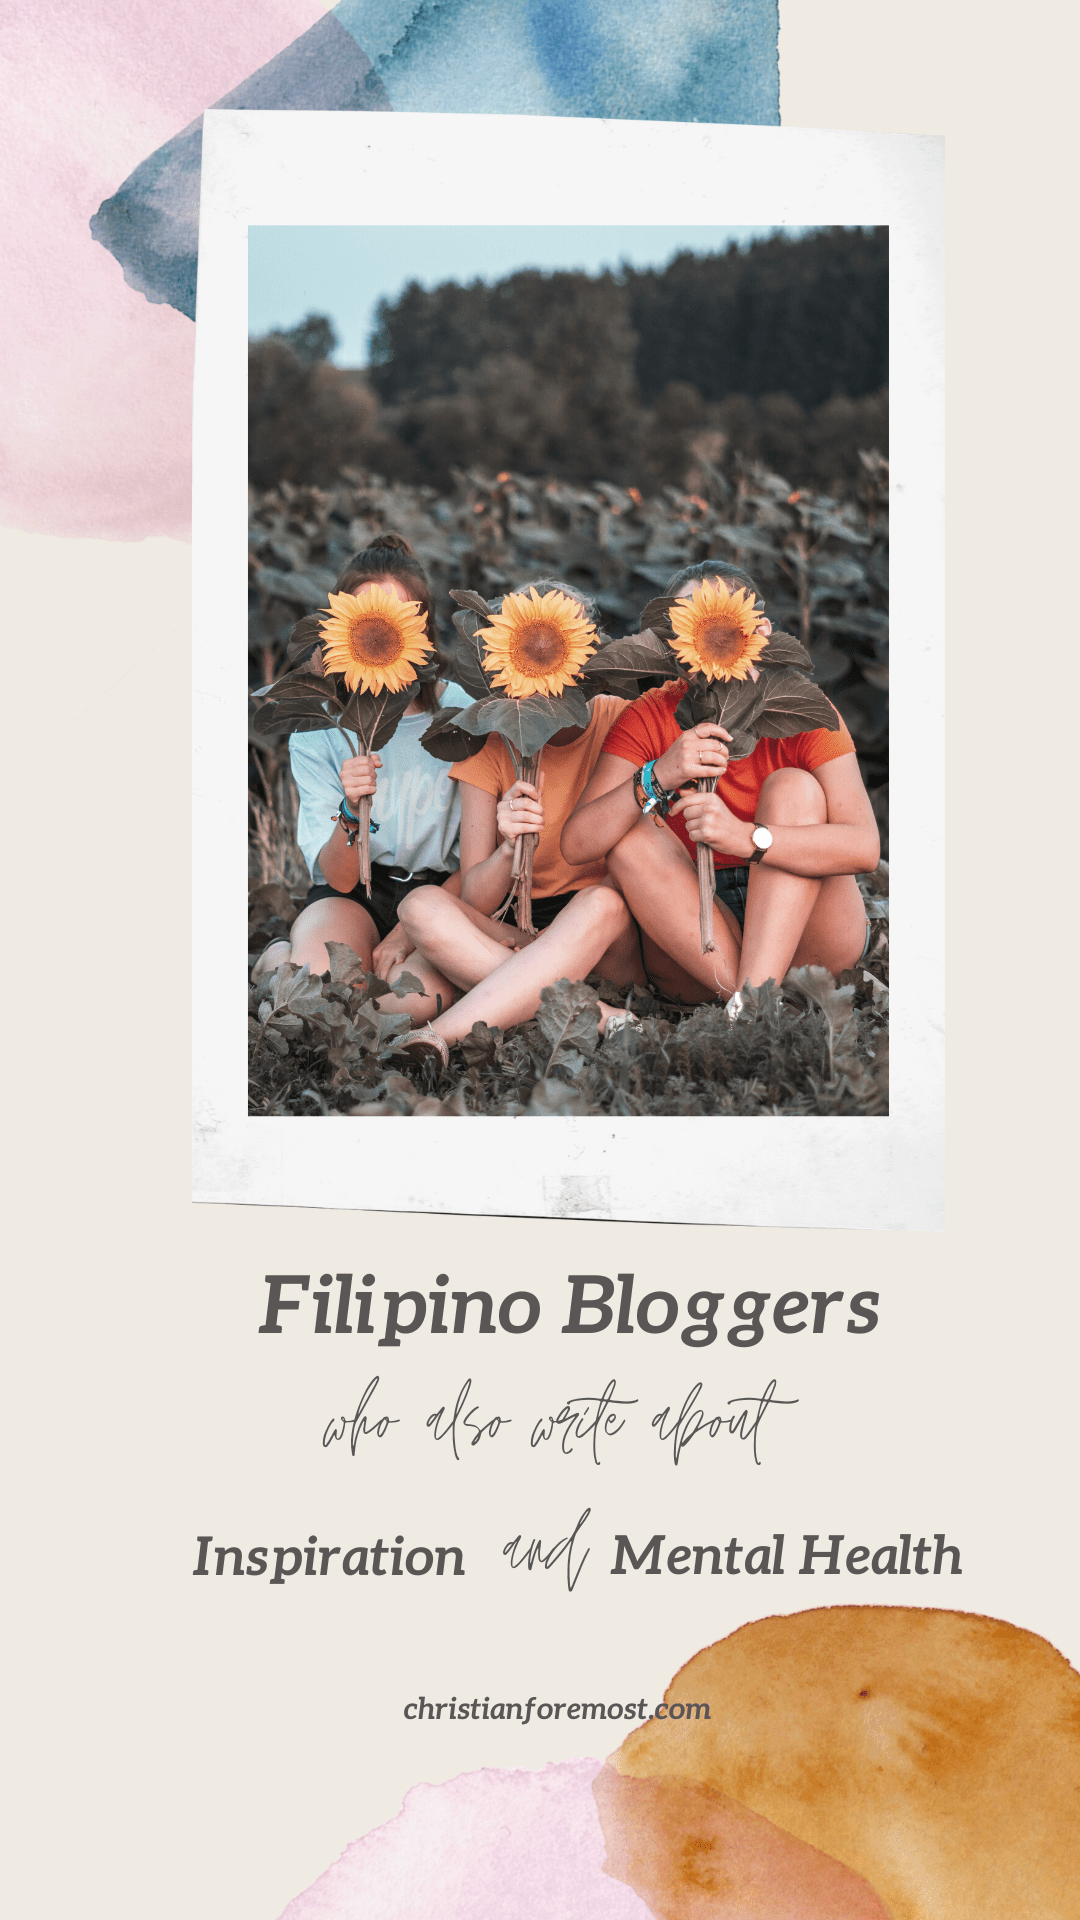 Filipino Bloggers Who Also Write about Inspiration, Mental Health, and Personal Development